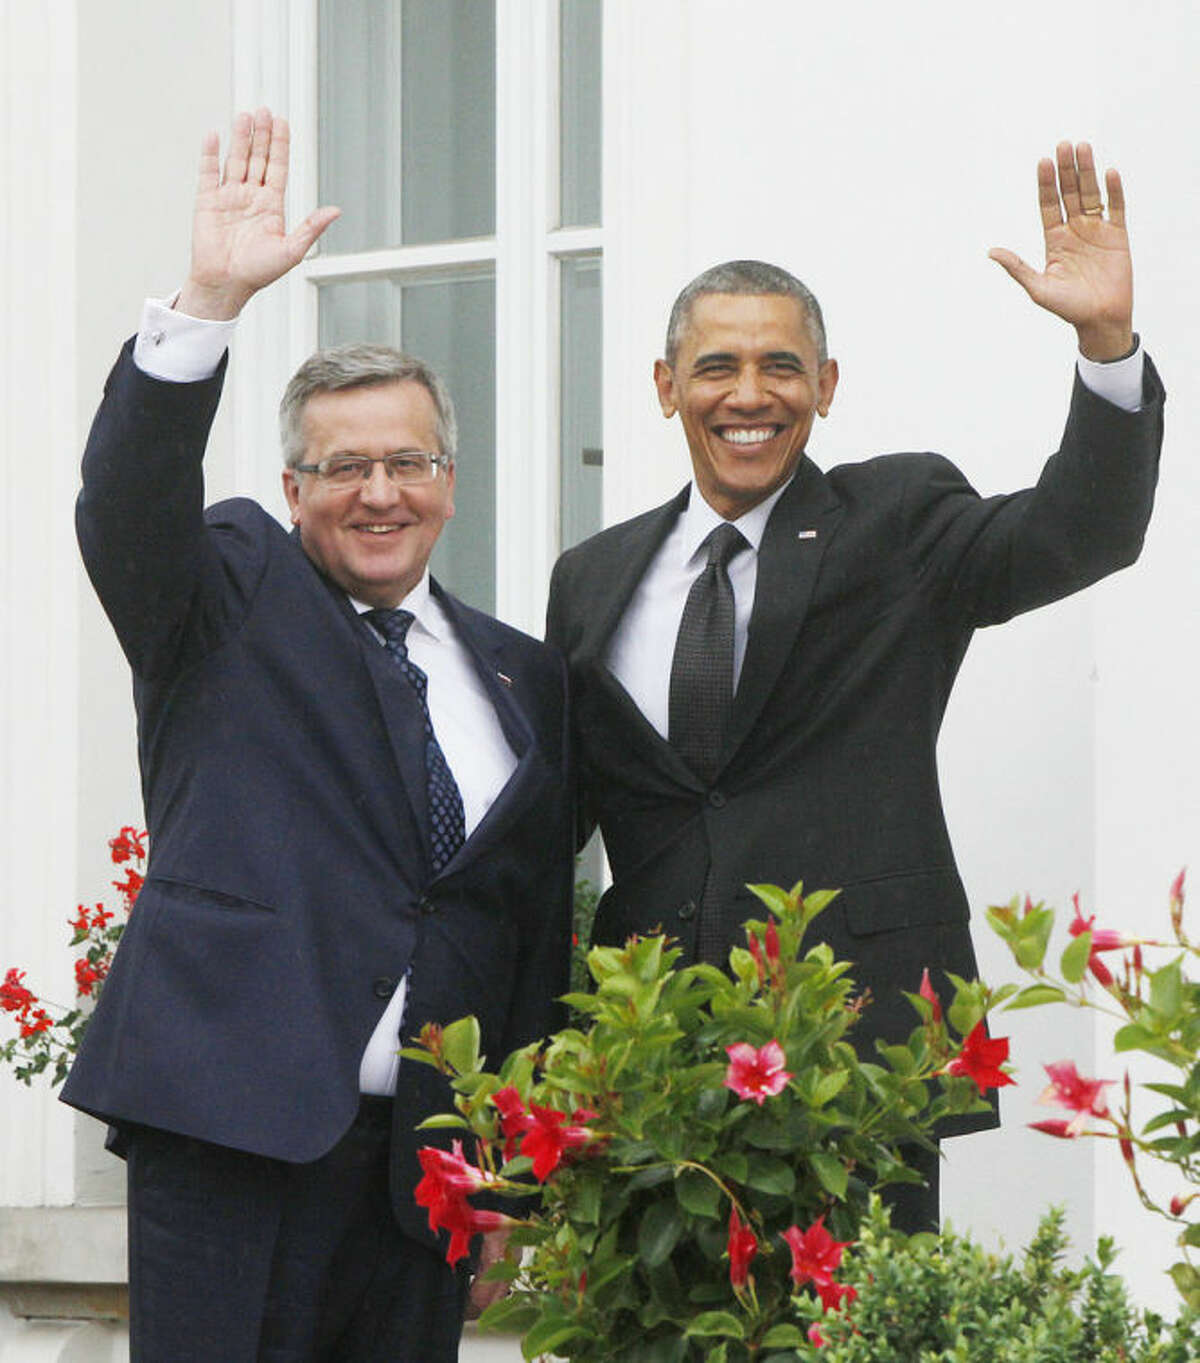 U.S. President Barack Obama,right, and Poland's President Bronislaw Komorowski ,left, wave at Belveder residence in Warsaw, Poland, on Tuesday June 3, 2014.Obama came to Poland to meet regional leaders and attend ceremonies marking 25 years of Poland's democracy. (AP Photo/Czarek Sokolowski)